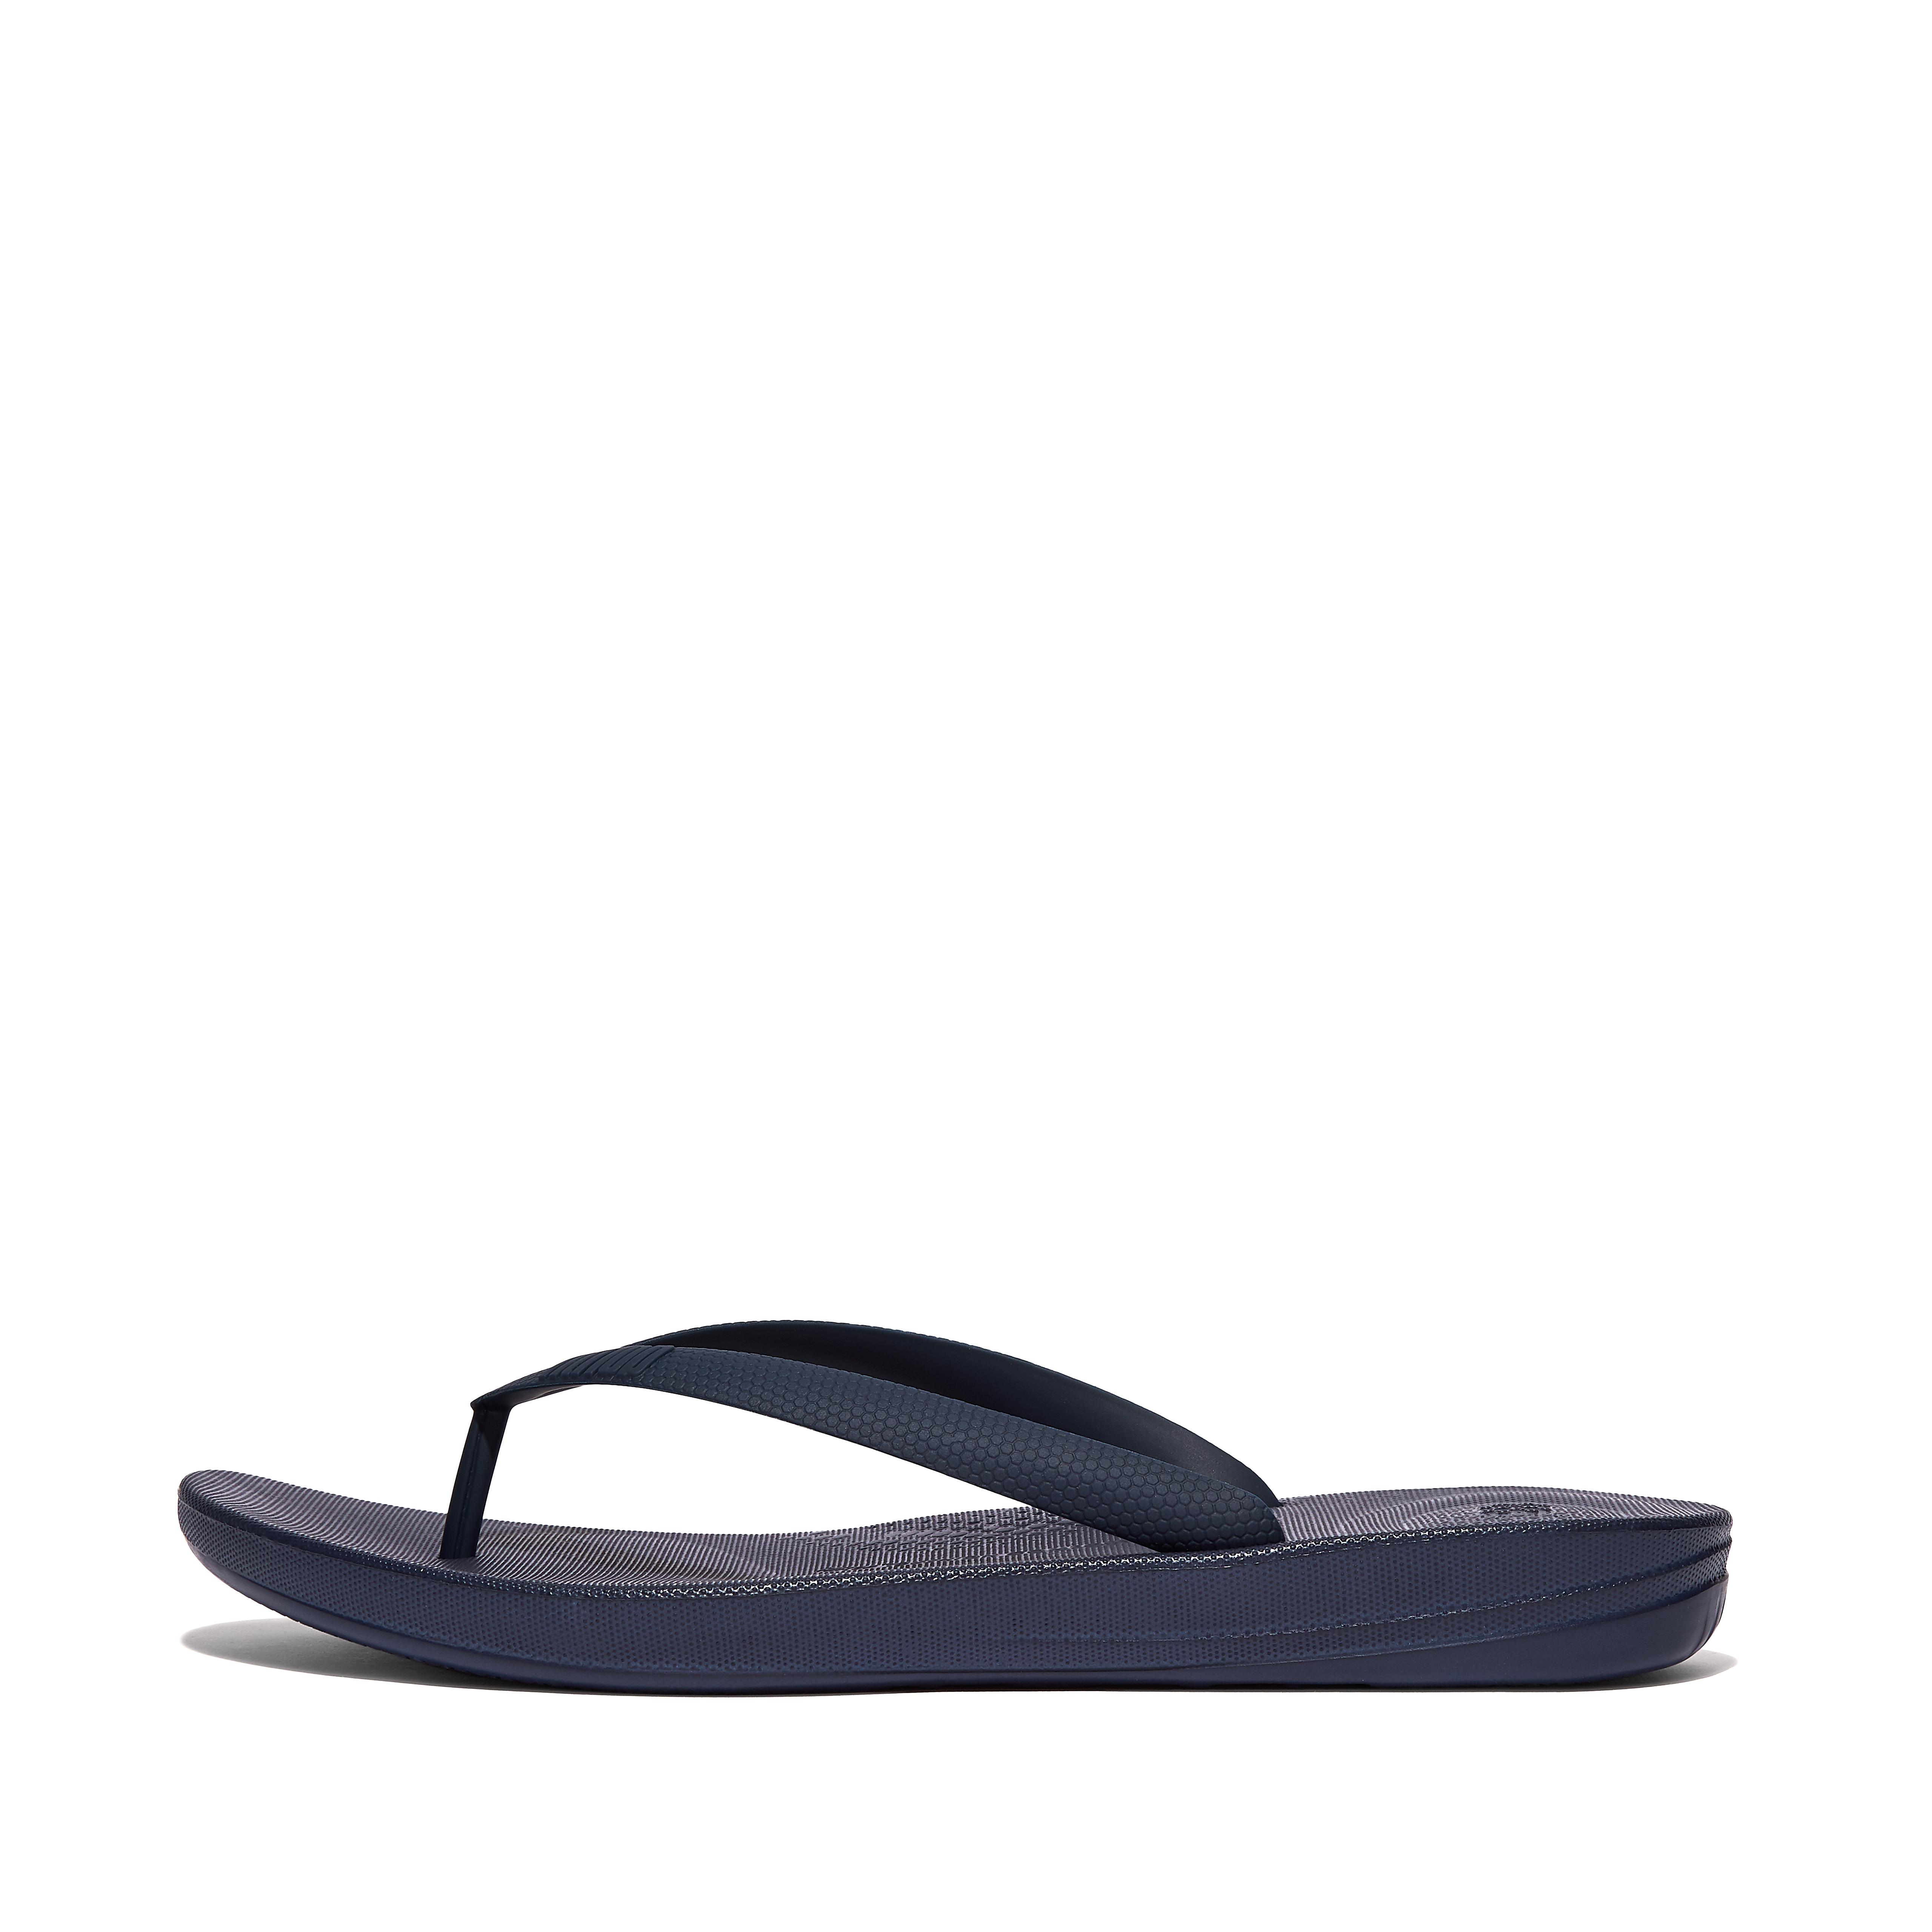 mens rubber sandals with backstrap